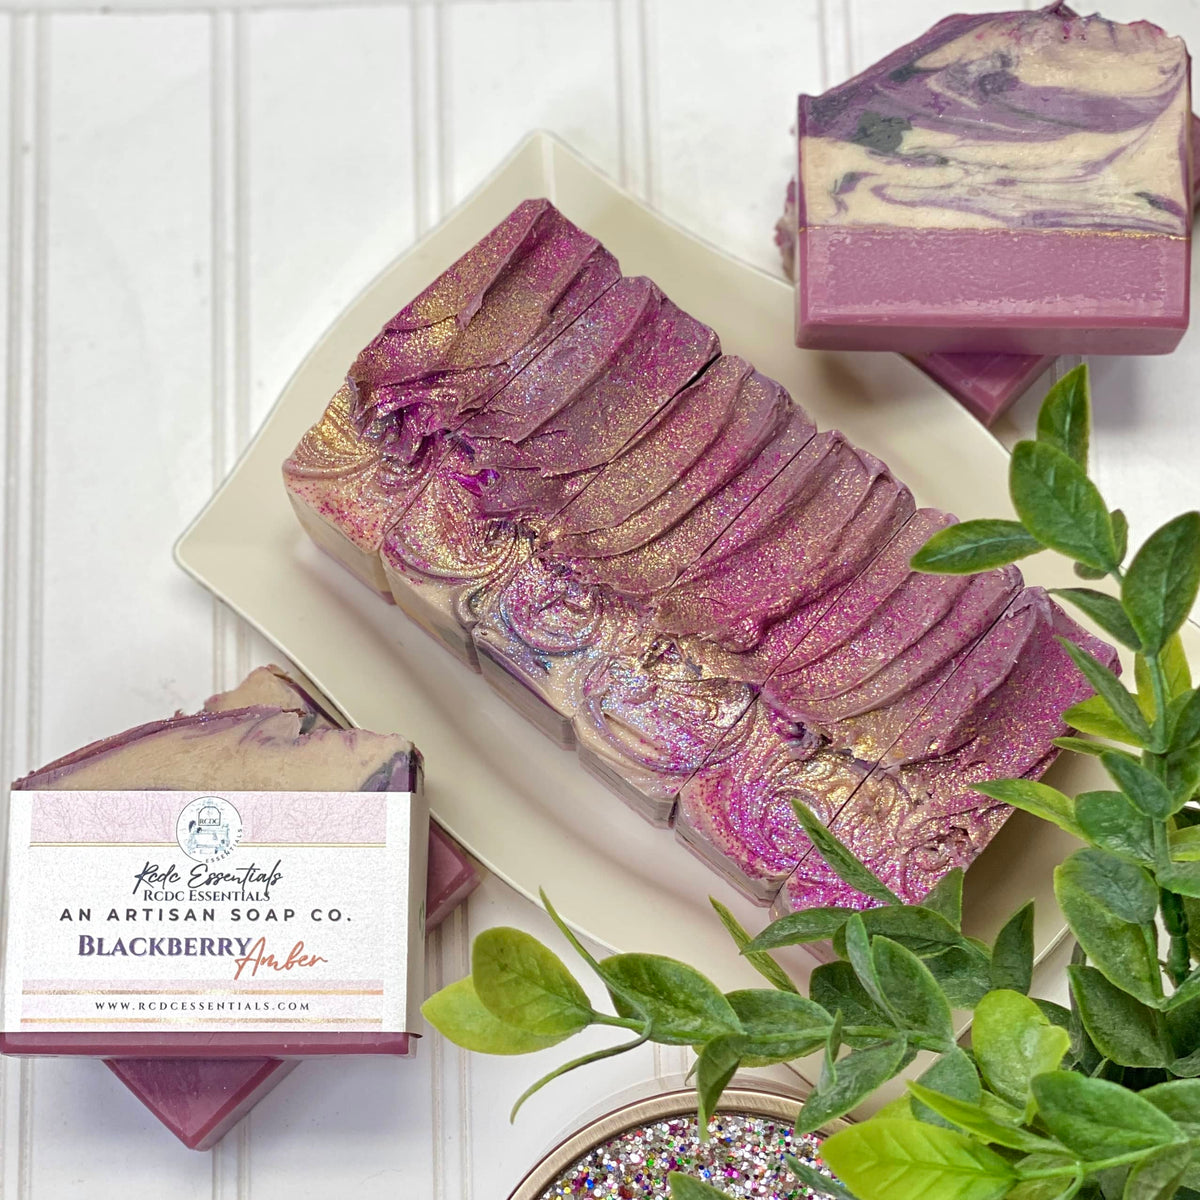 Handmade soaps-soapmaking-soap making-essential oils in bulk amounts-essential  oils for aromatherapy-handmade soaps and soapmaking > The Herbarie at  Stoney Hill Farm, Inc.